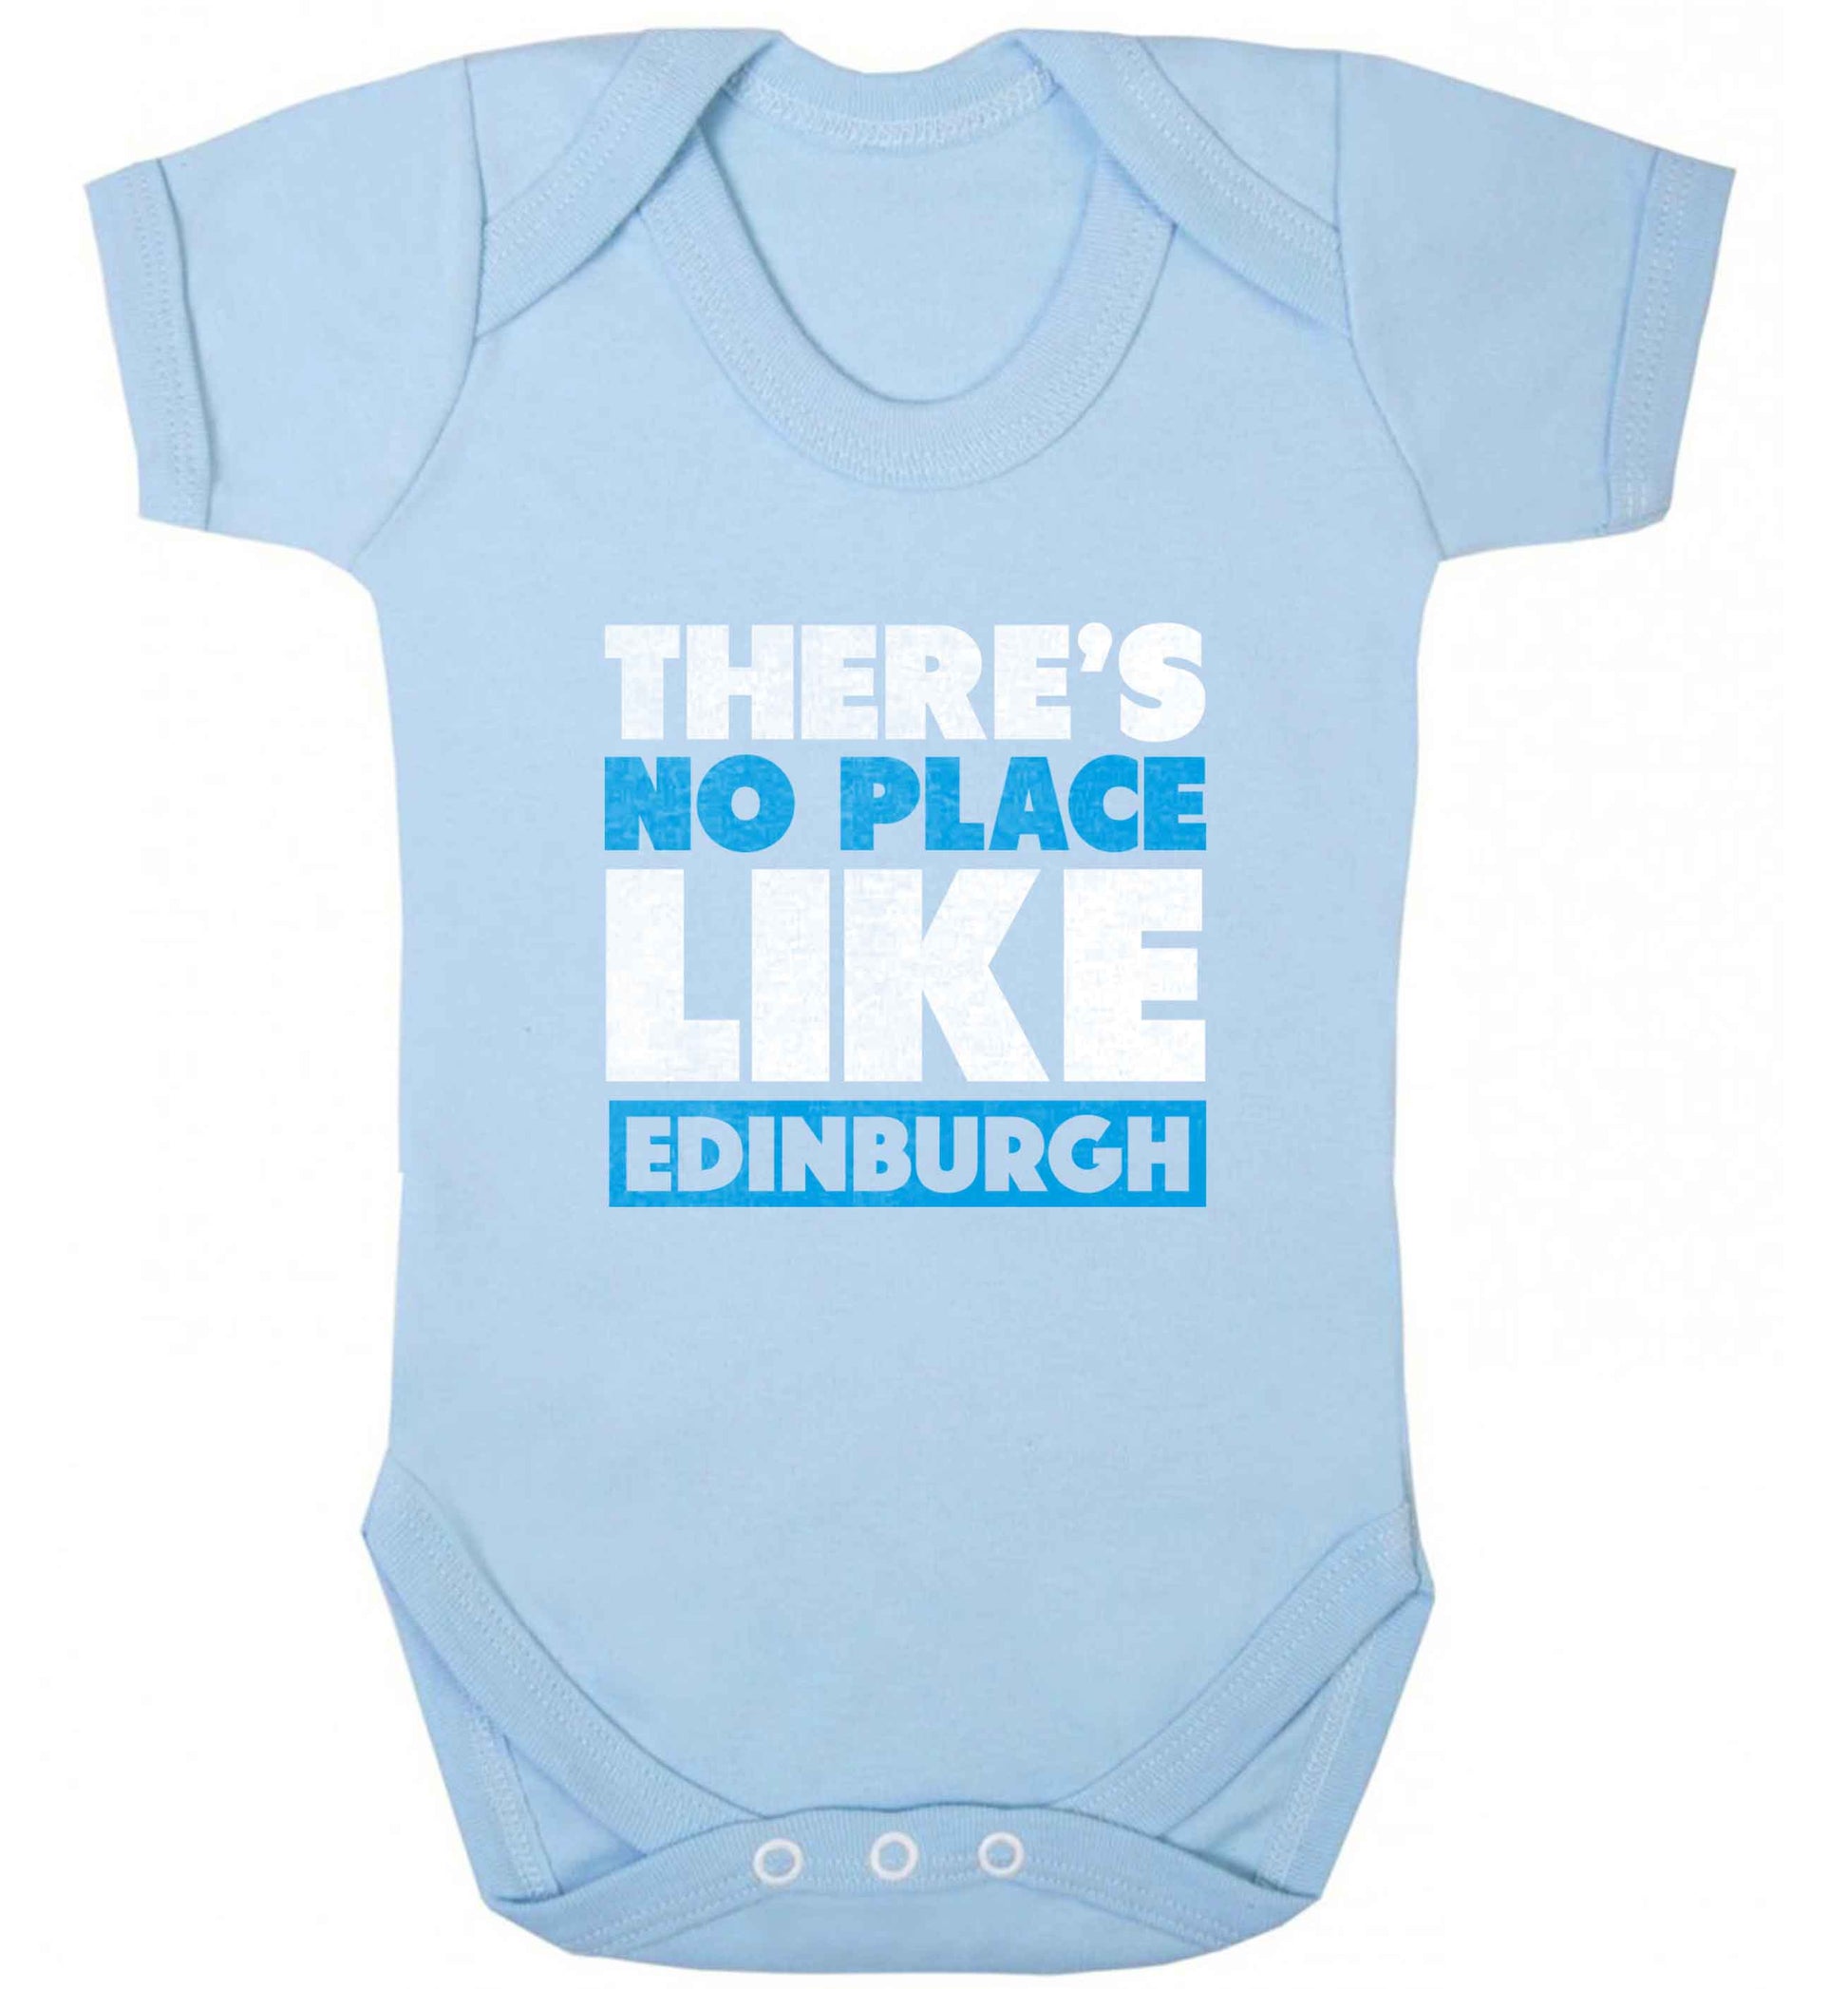 There's no place like Edinburgh baby vest pale blue 18-24 months